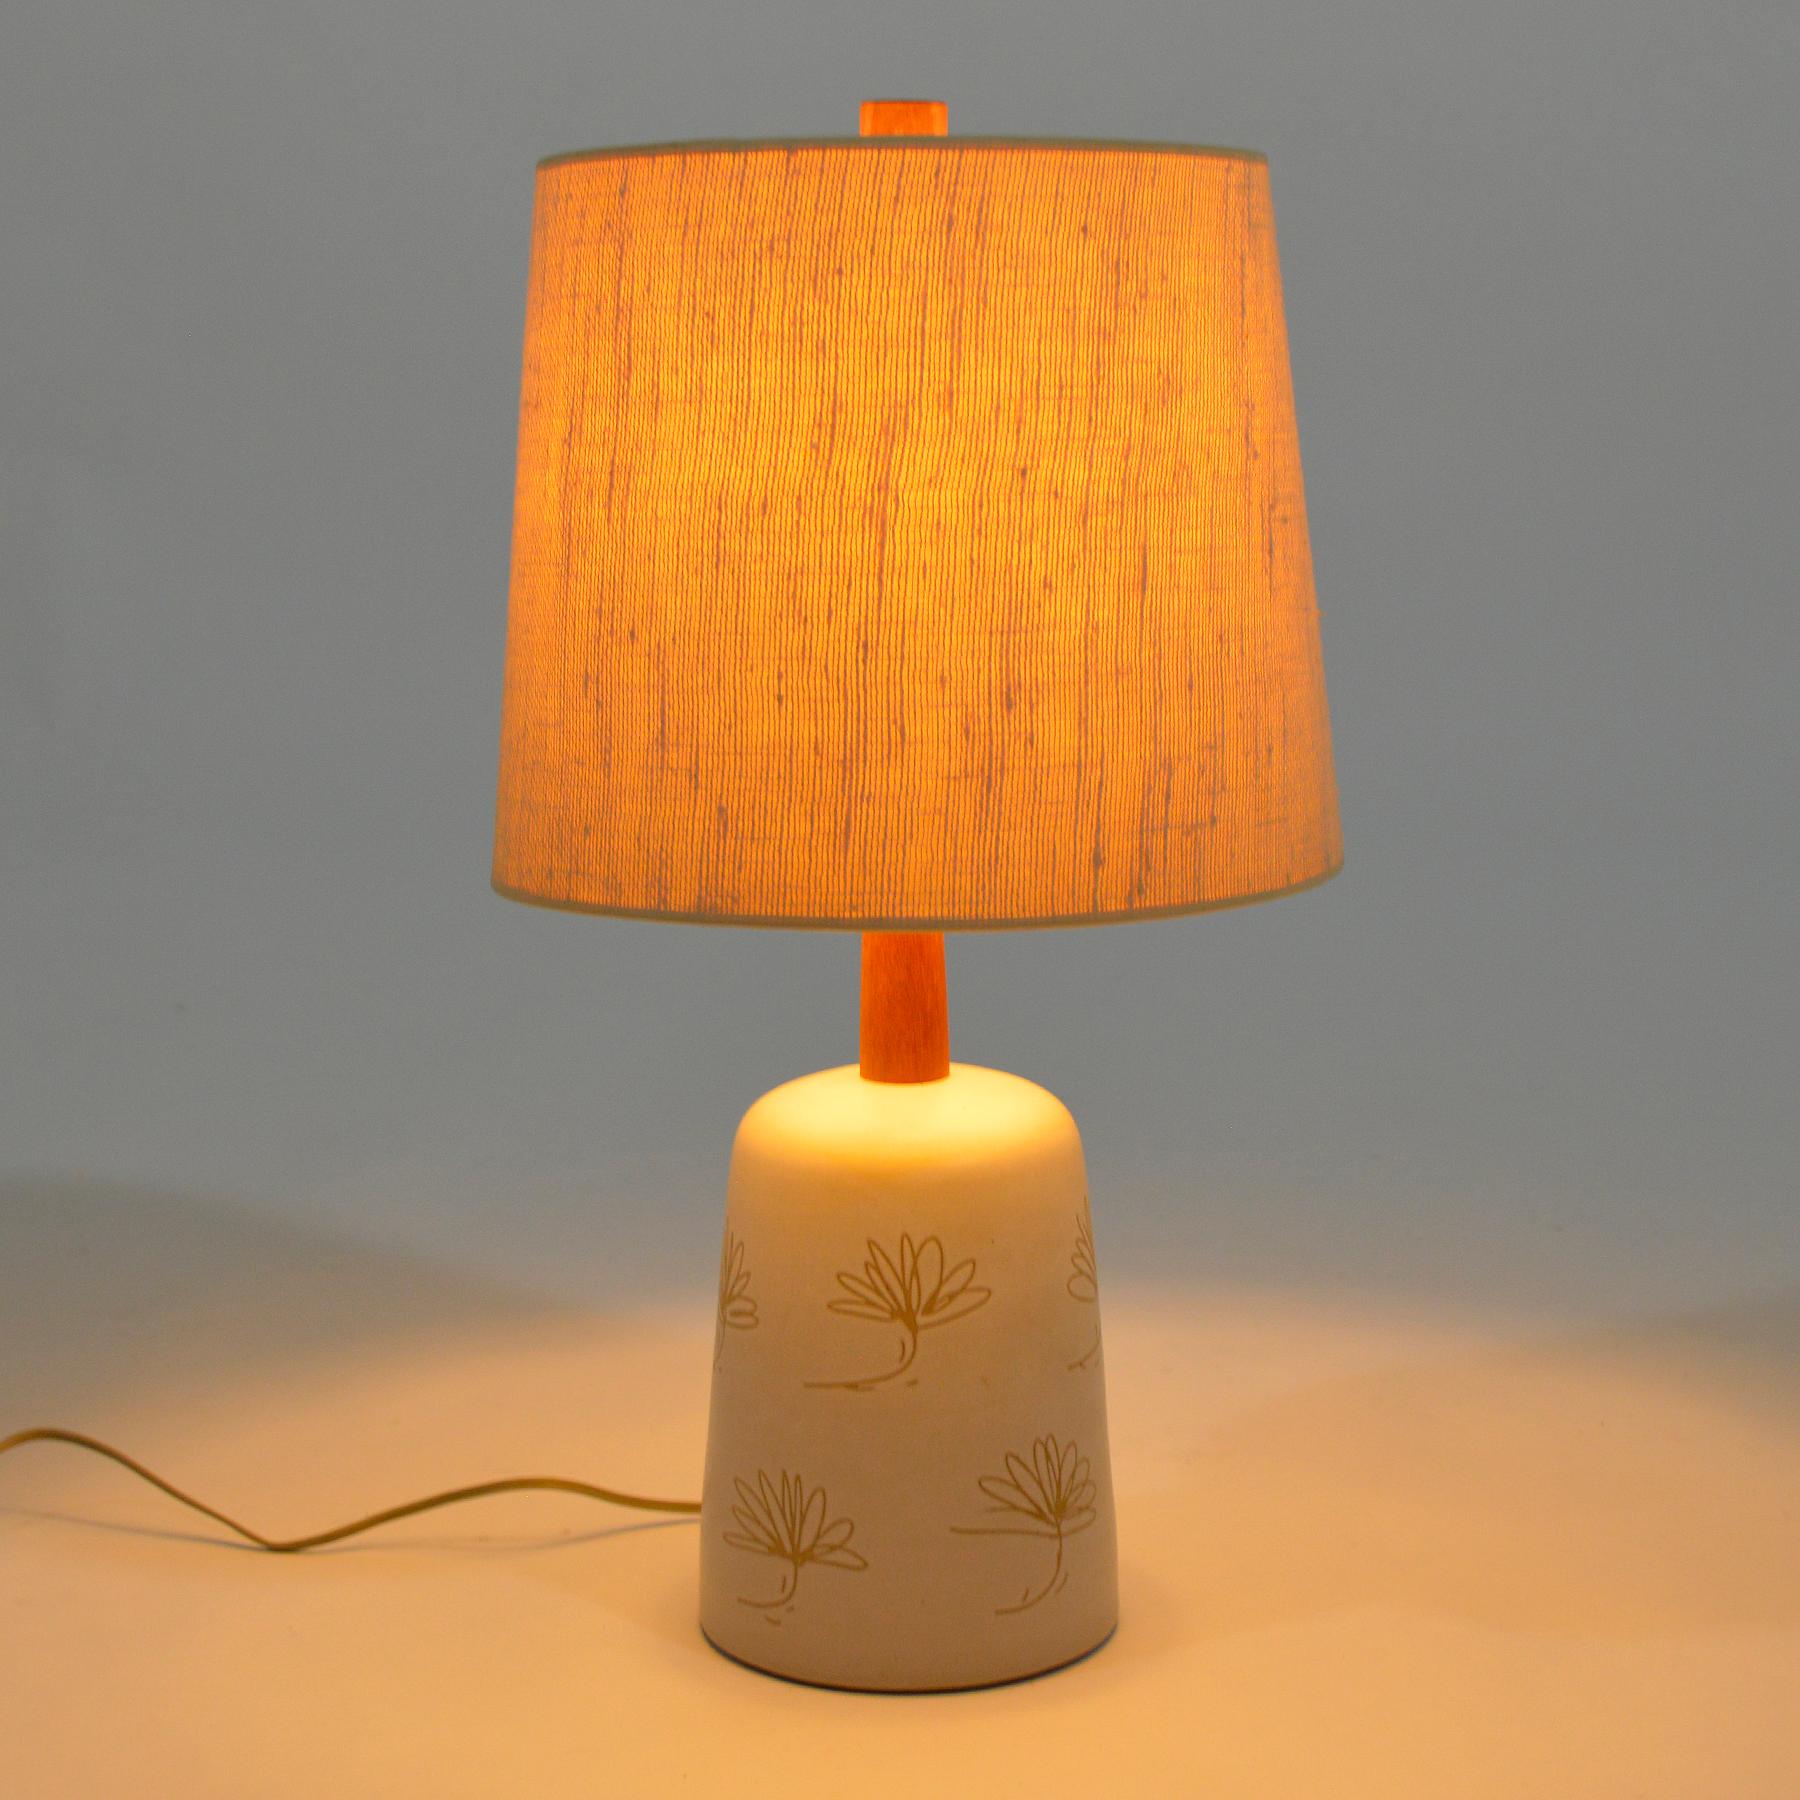 Mid-20th Century Martz Table Lamp with Floral Sgraffito Decoration